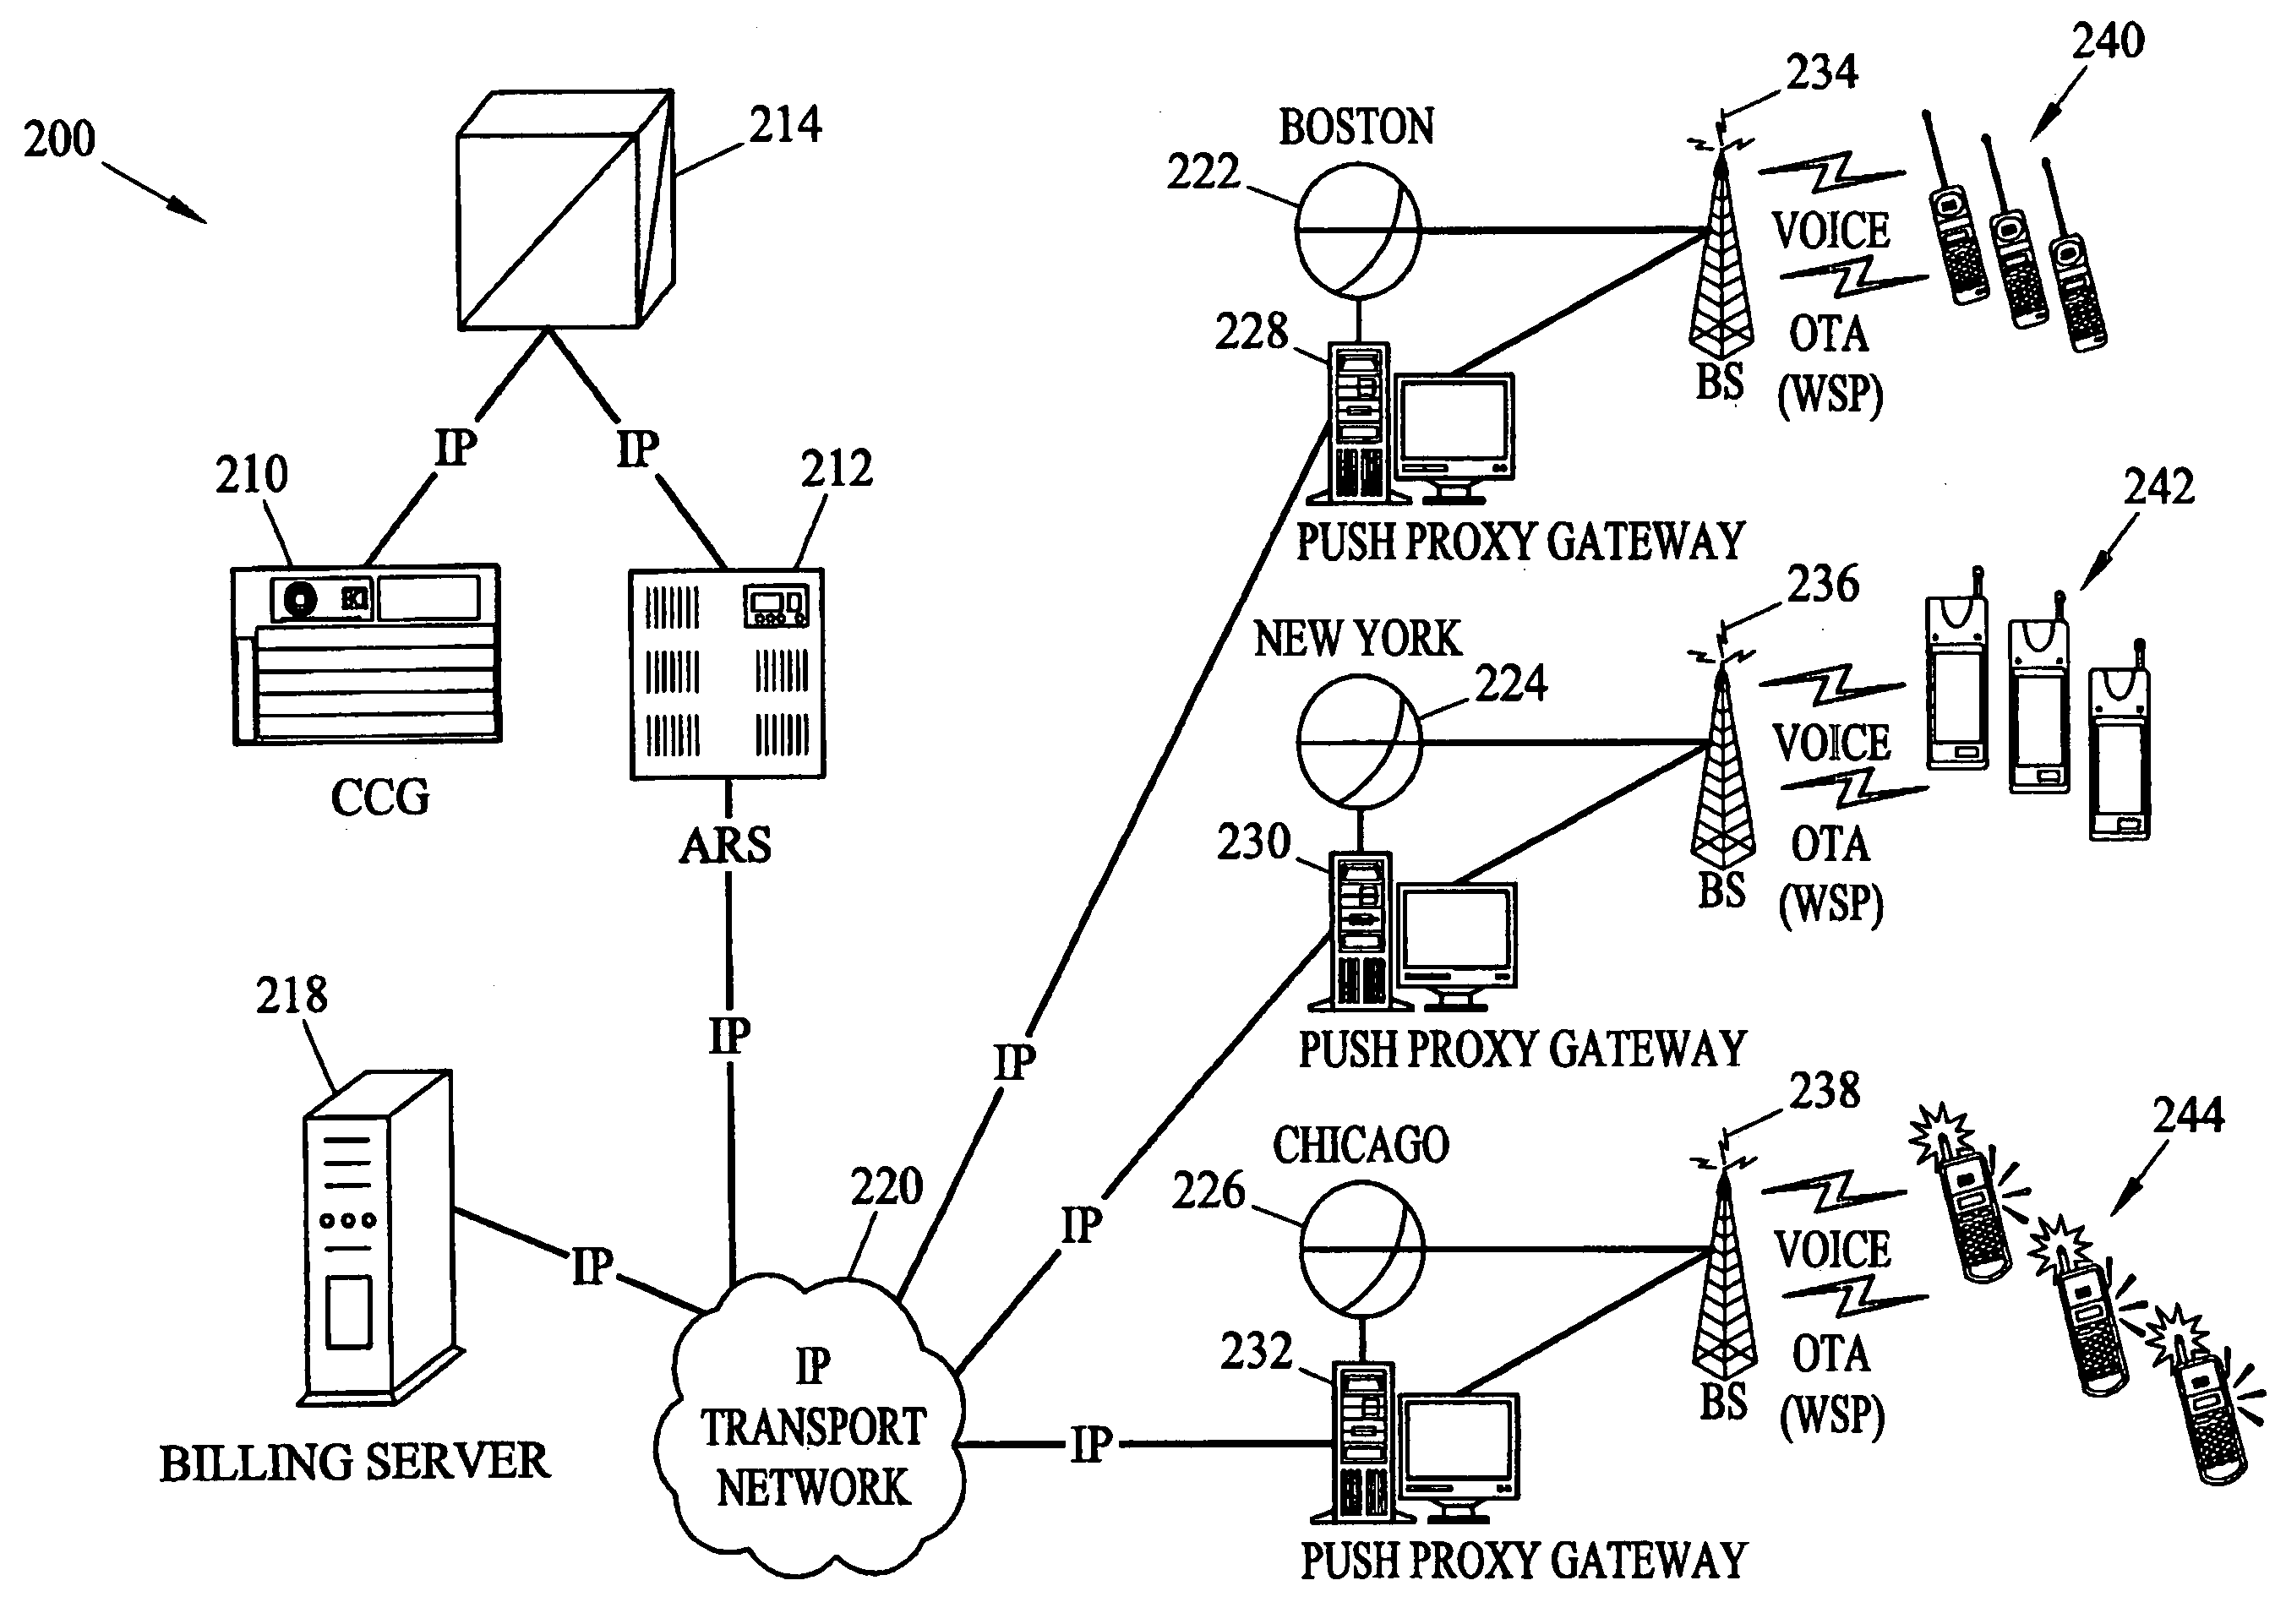 Methods and systems for generating, distributing, and screening commercial content